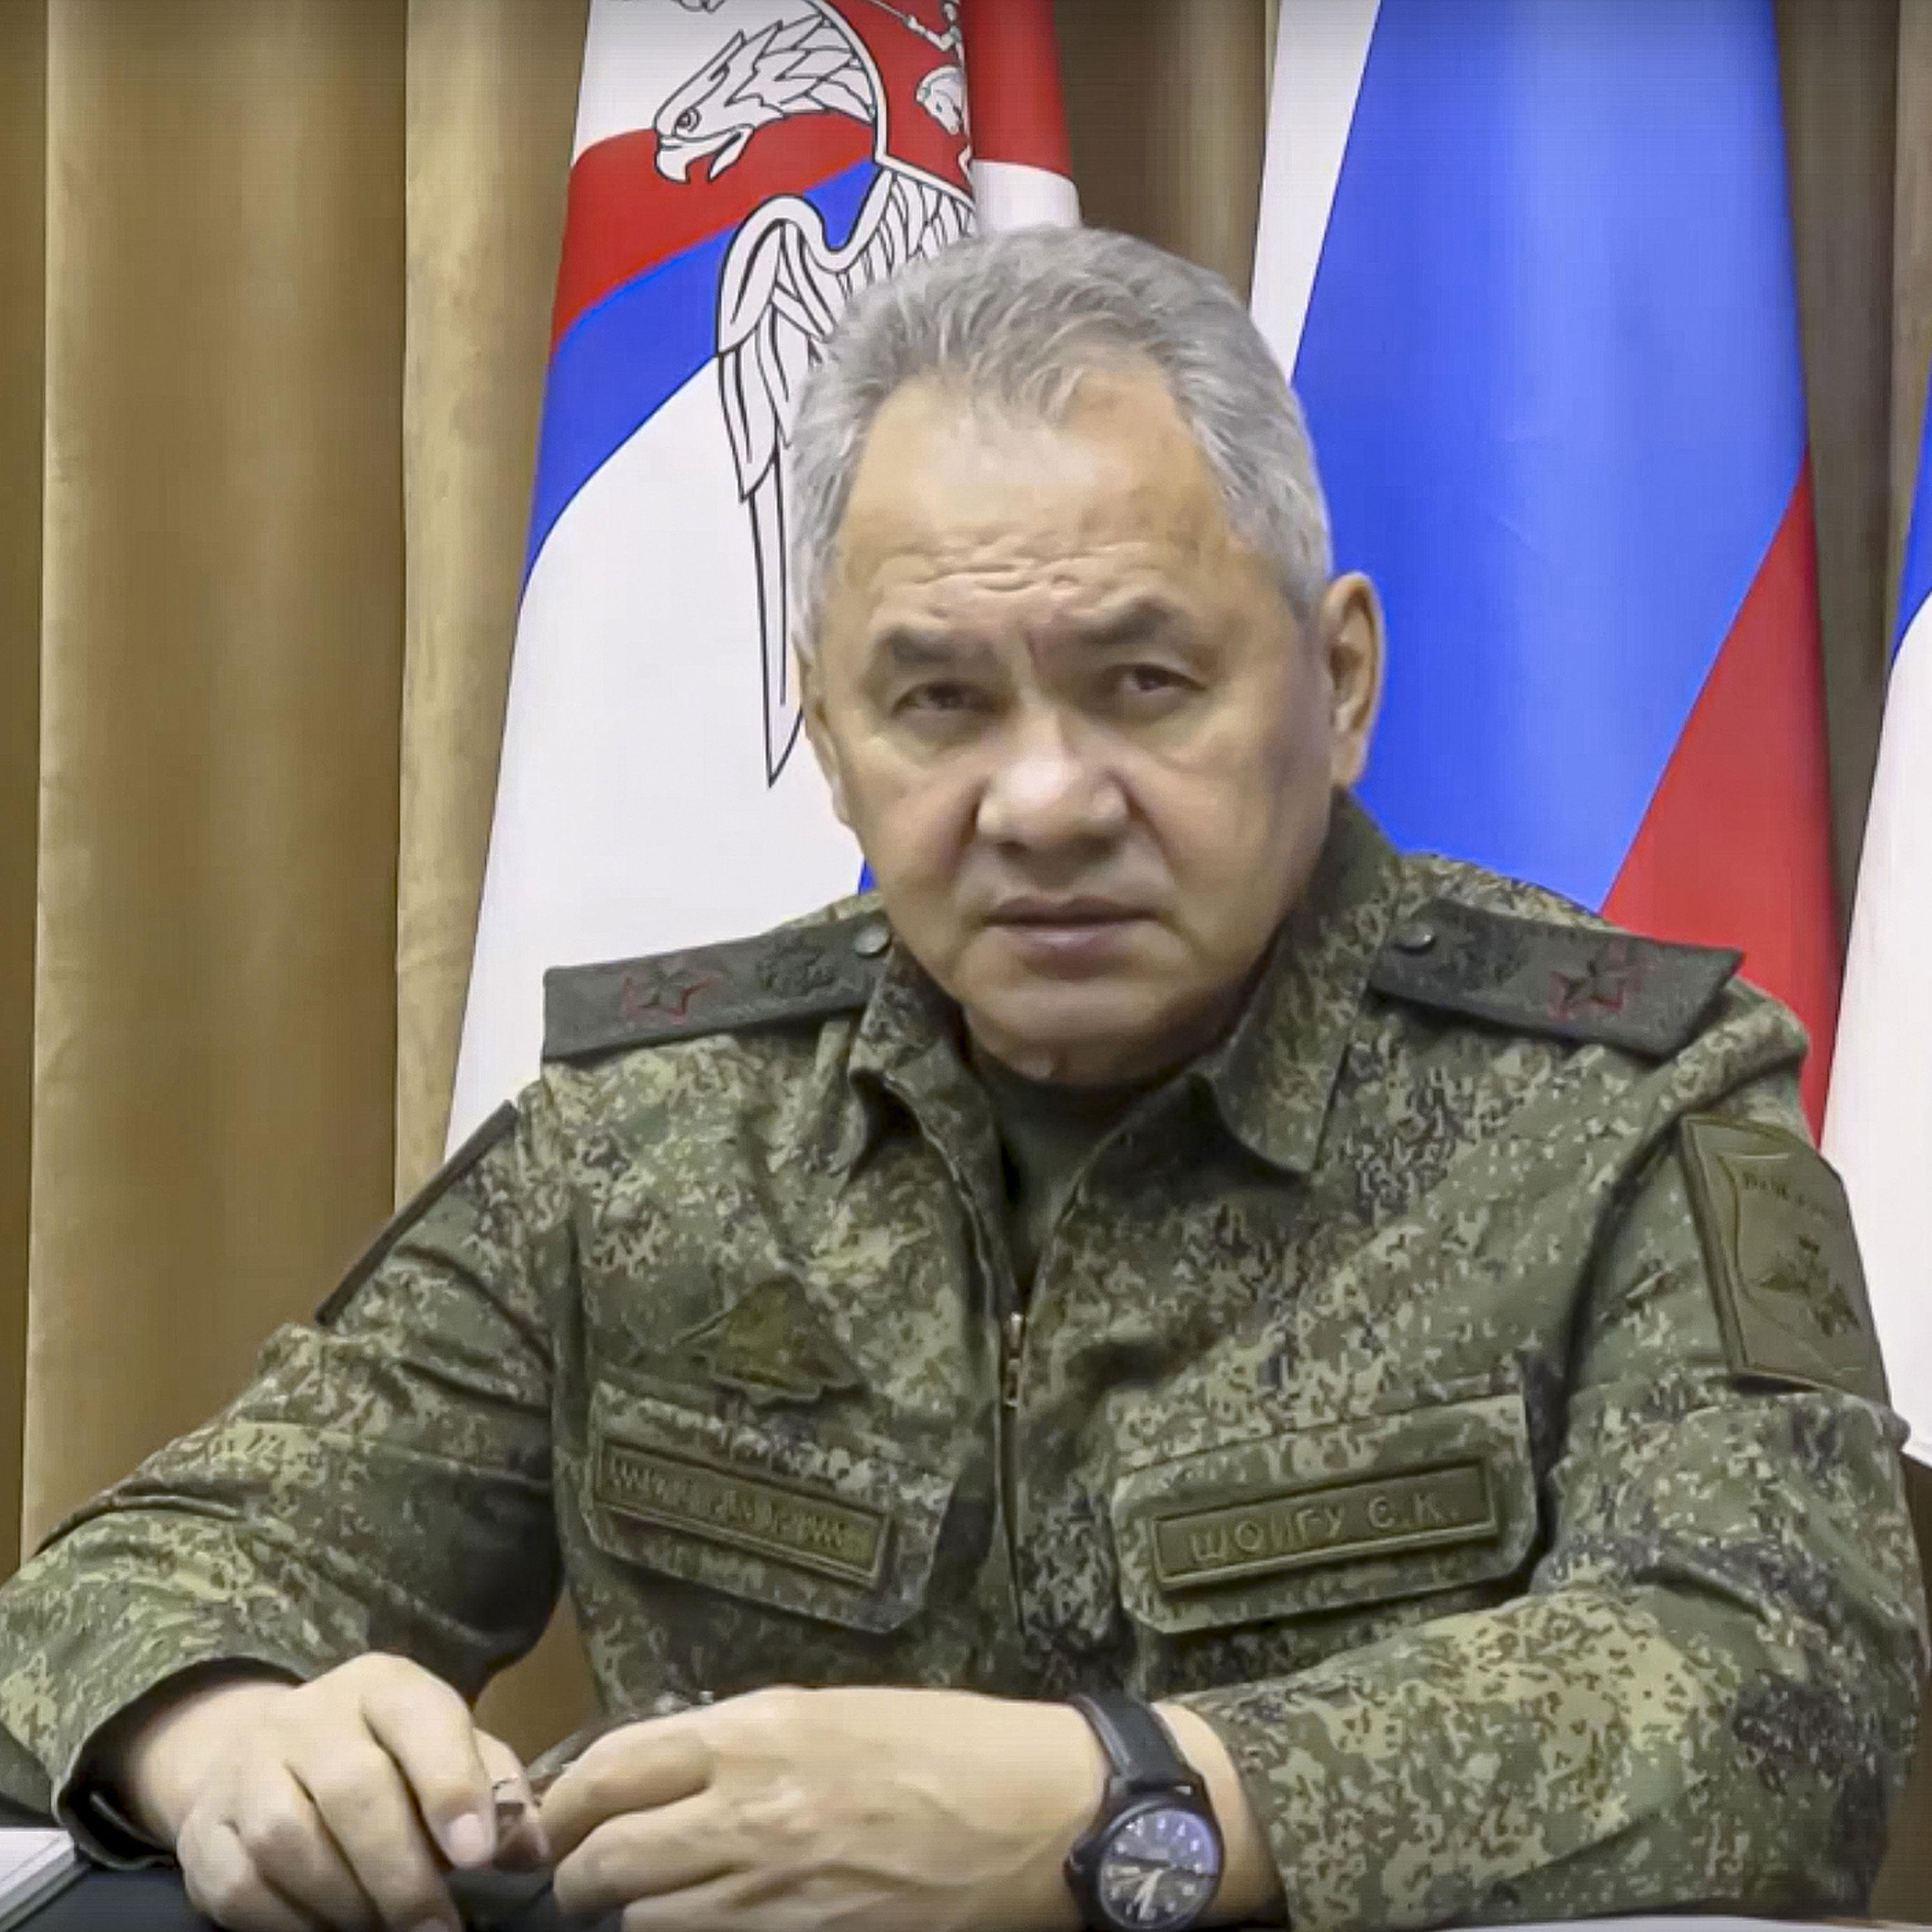 Shoigu to step down as Russian defense minister